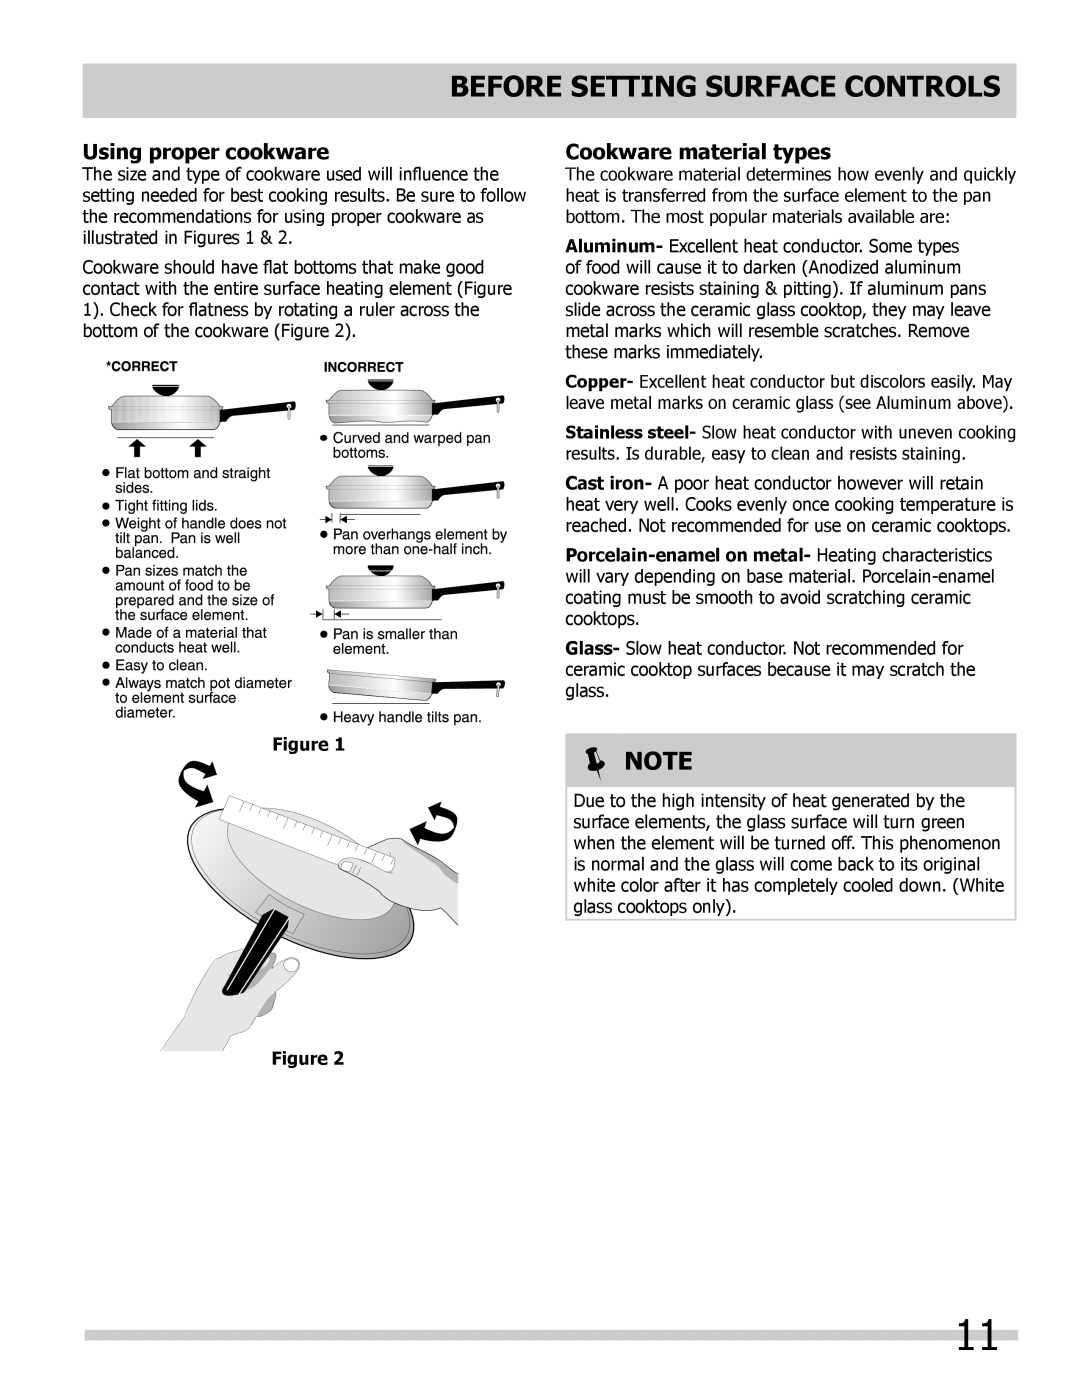 Frigidaire 318205804 manual Using proper cookware, Cookware material types, BEFORE Setting surface controls,  Note 